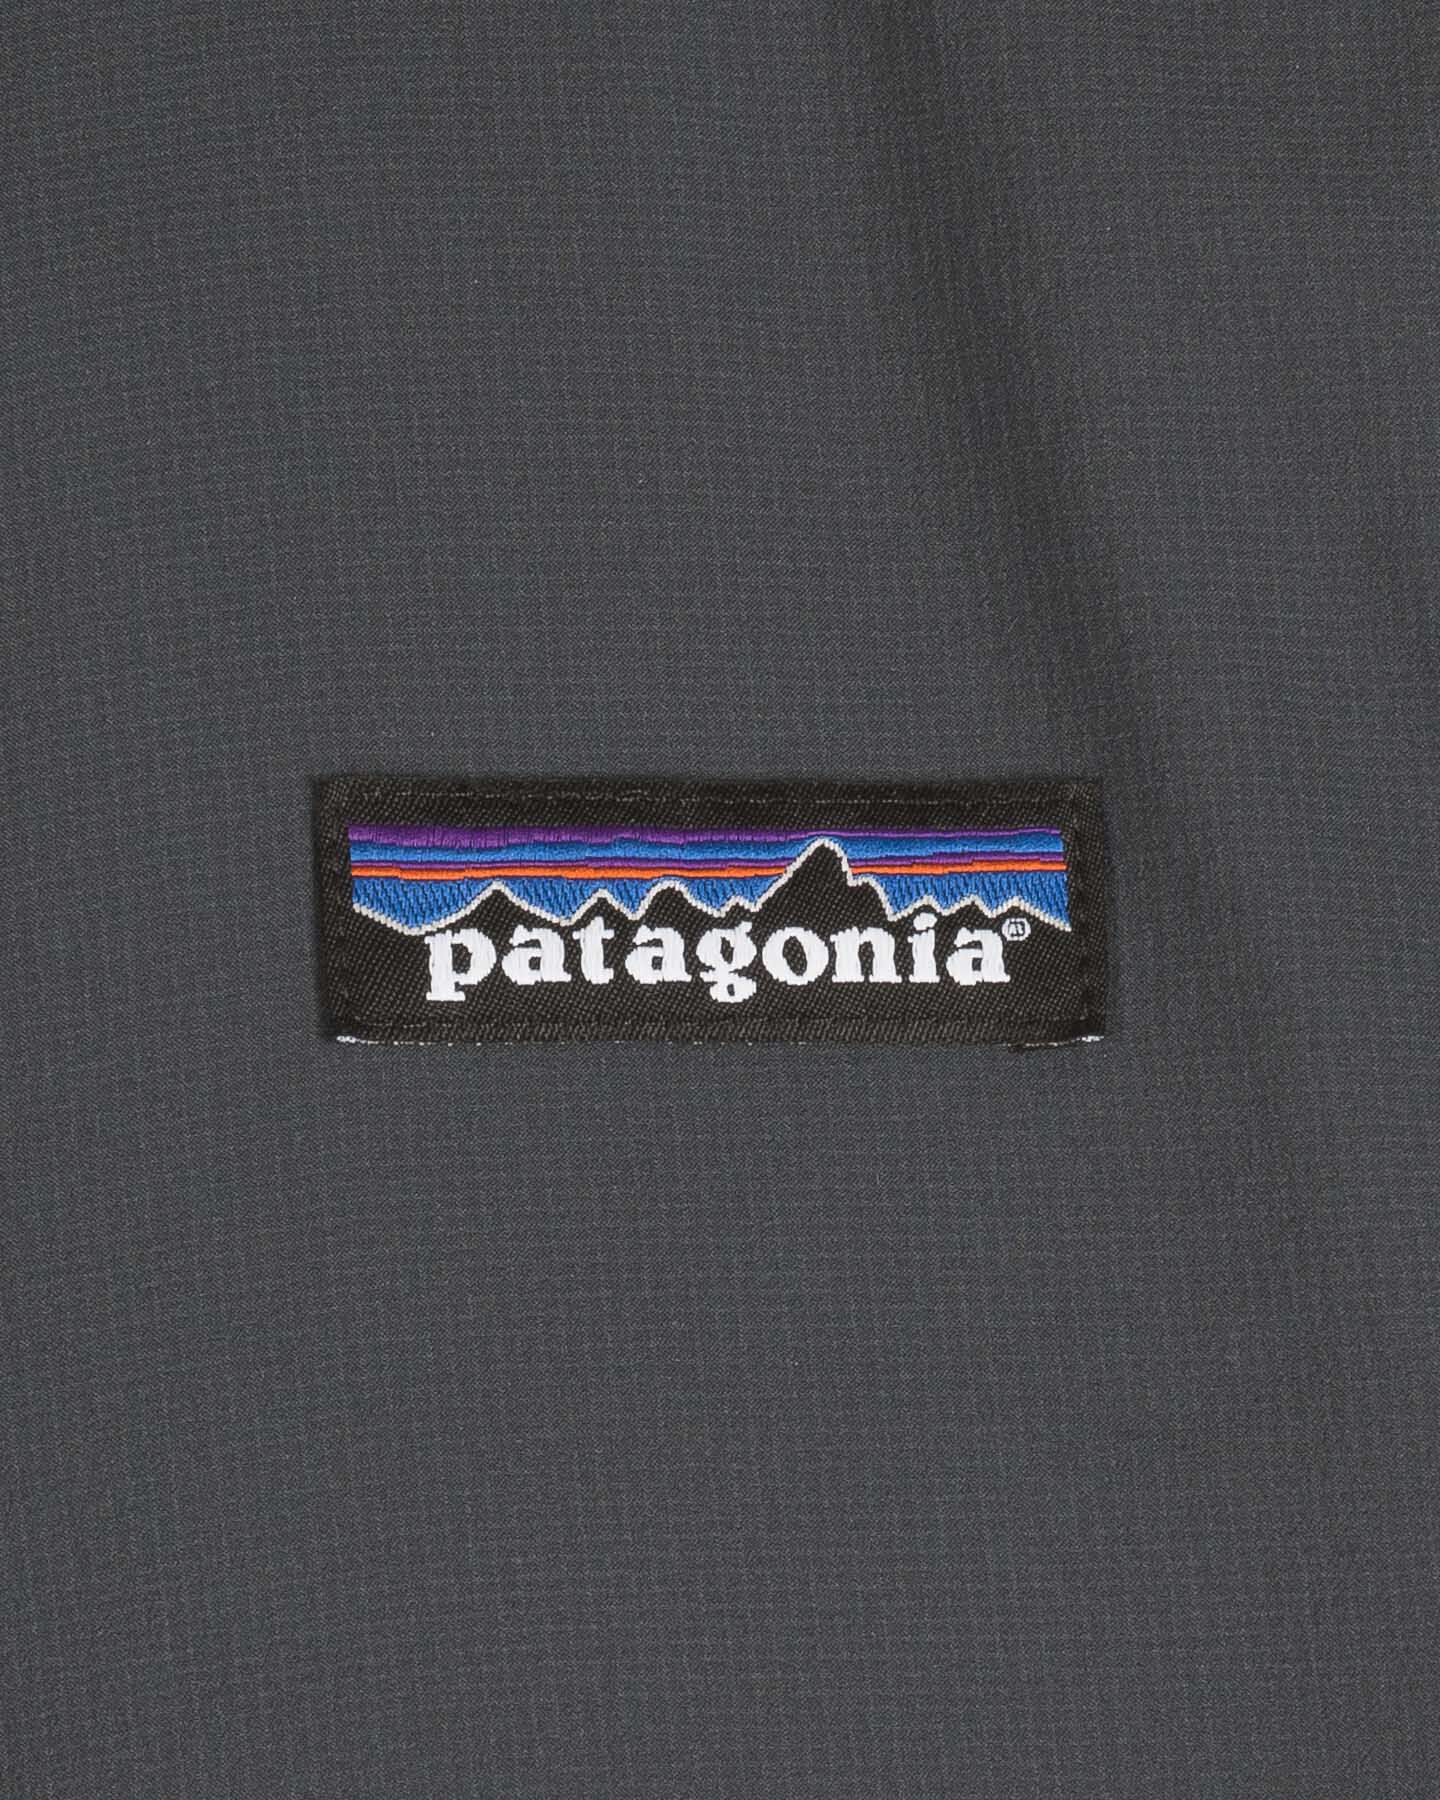  Giacca outdoor PATAGONIA THERMAL AIRSHED M S4103399|SMDB|XL scatto 2